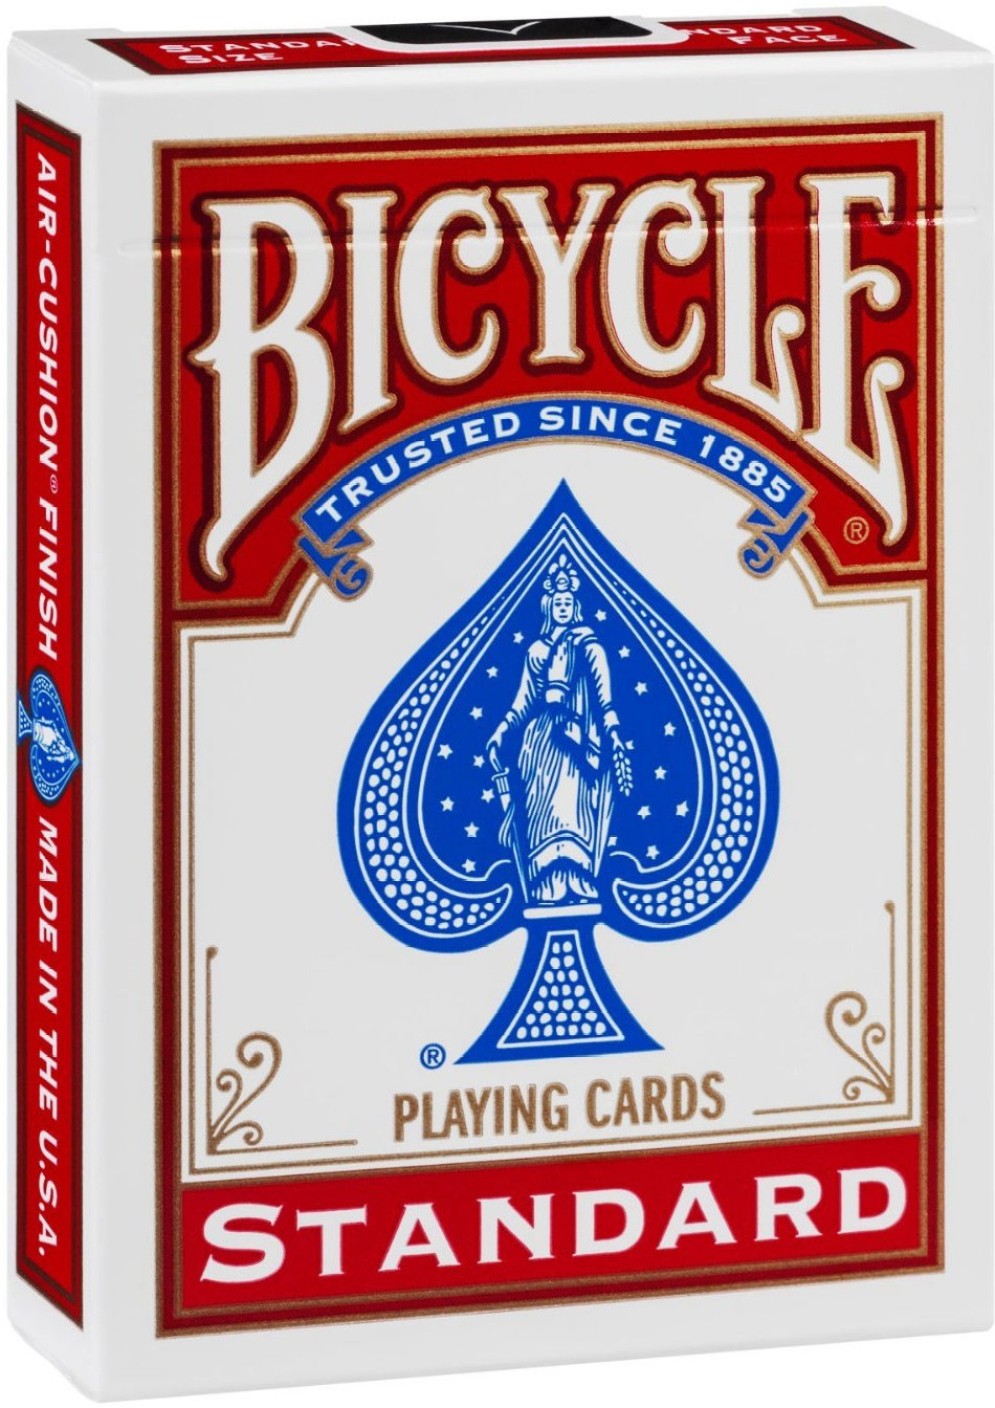 Bicycle Standard Playing Cards Standard Playing Cards . shop for